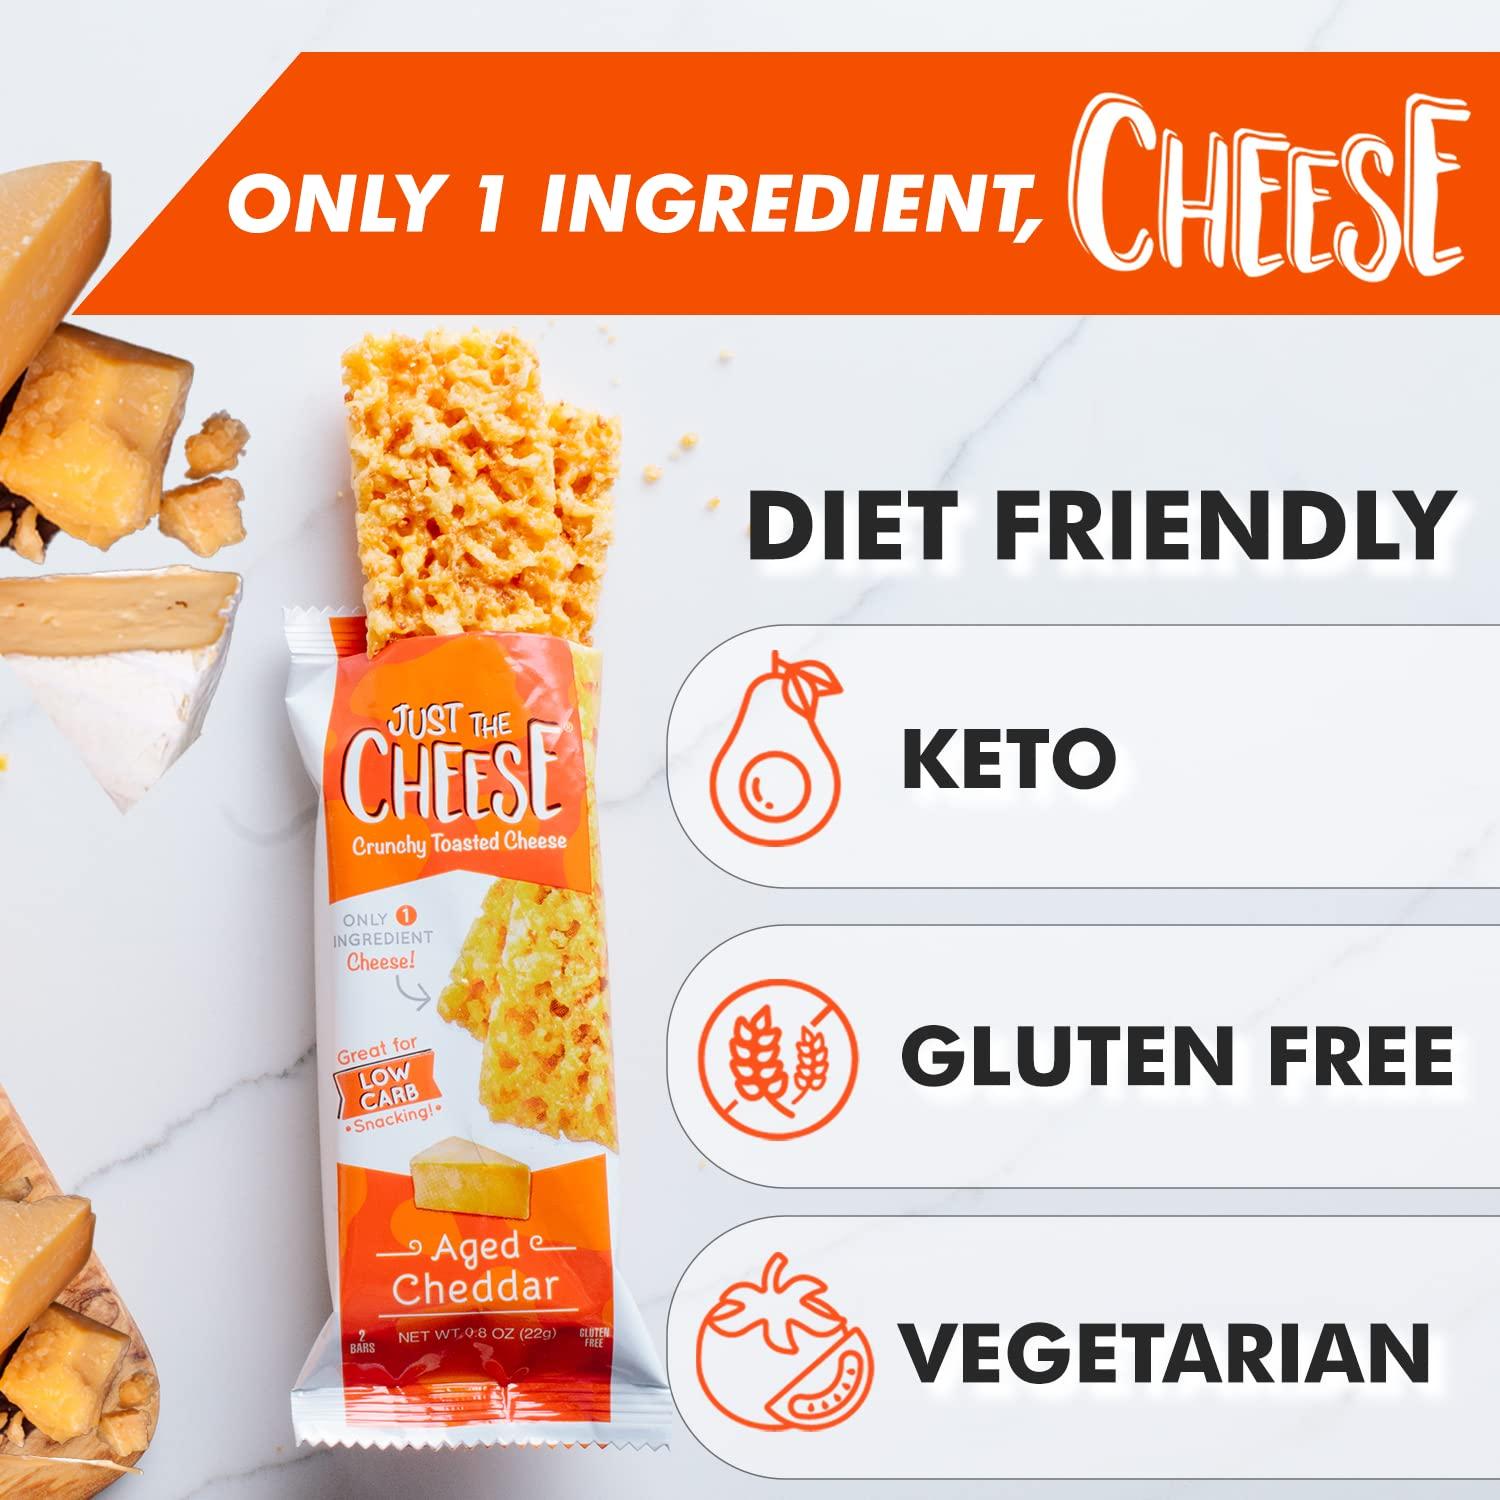 Just the Cheese Bars, Low Carb Snack - Baked Keto Snack, High Protein,  Gluten Free, Low Carb Cheese Crisps - Variety Pack, 0.8 Ounces (Pack of 12)